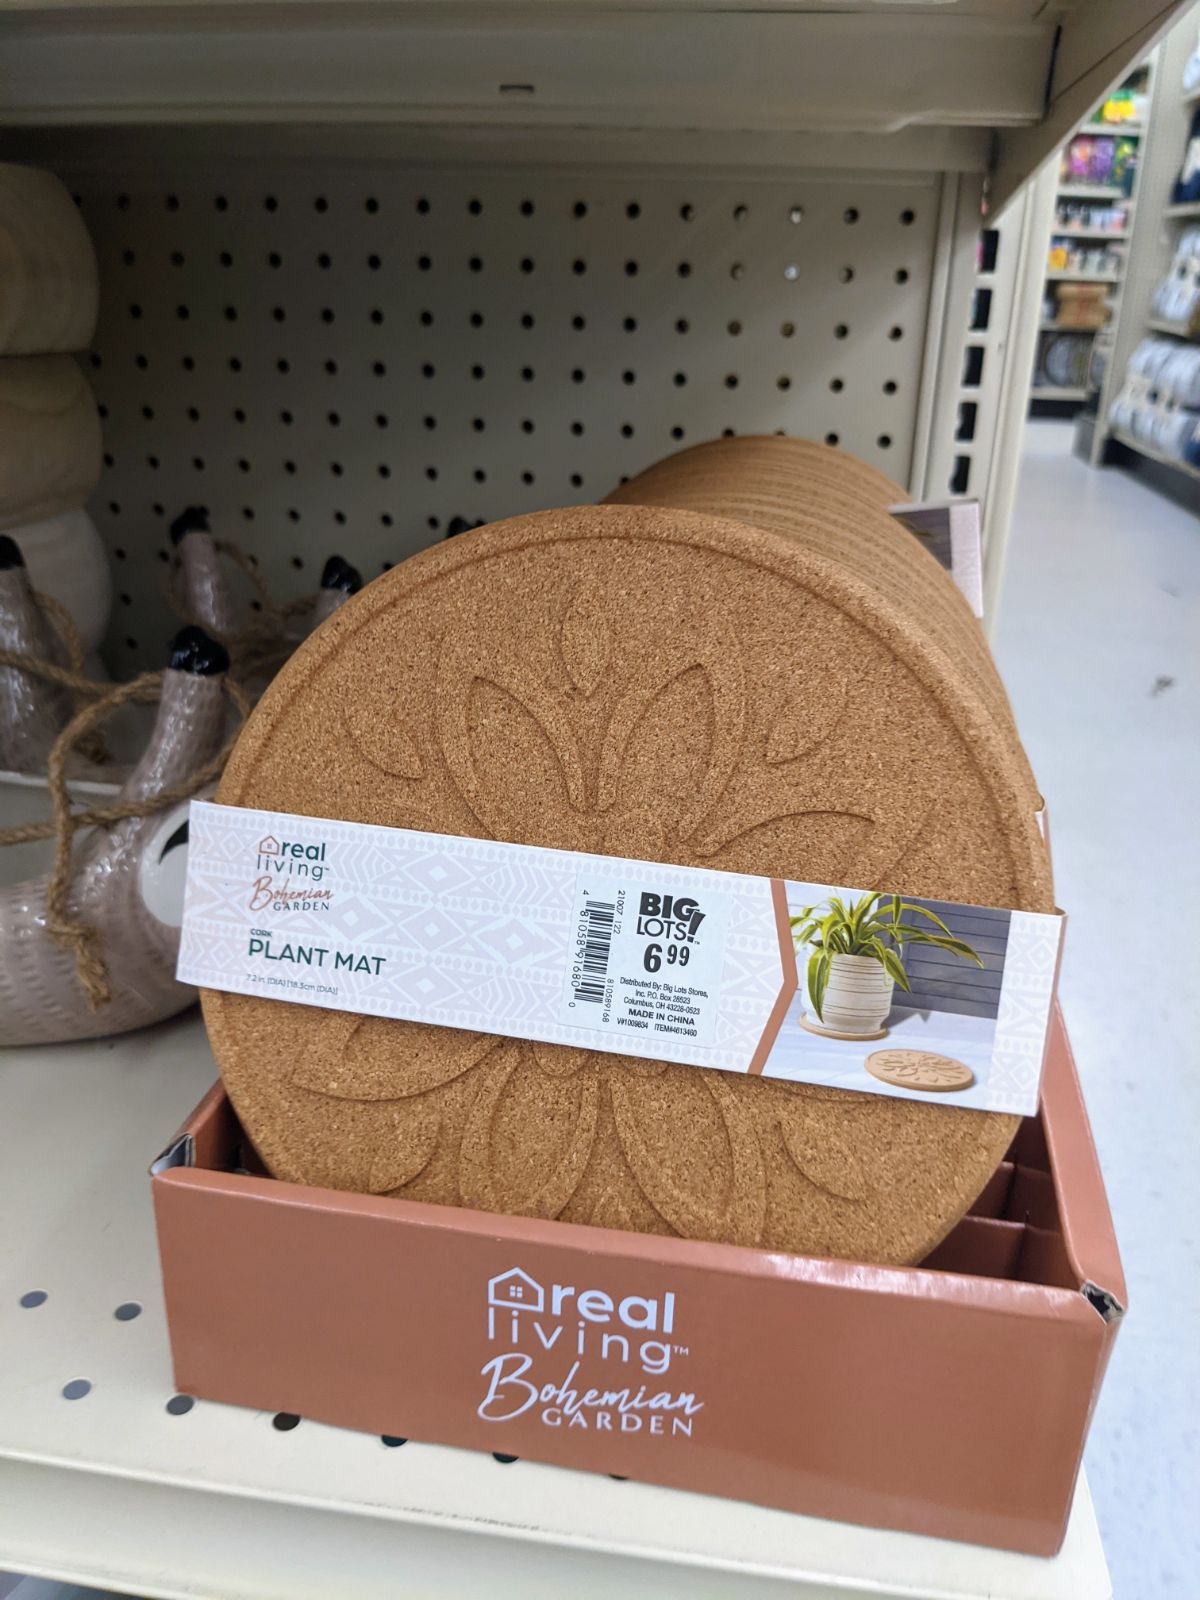 Cork plant mat with a flower in the center for sale in Boho garden section at Big Lots